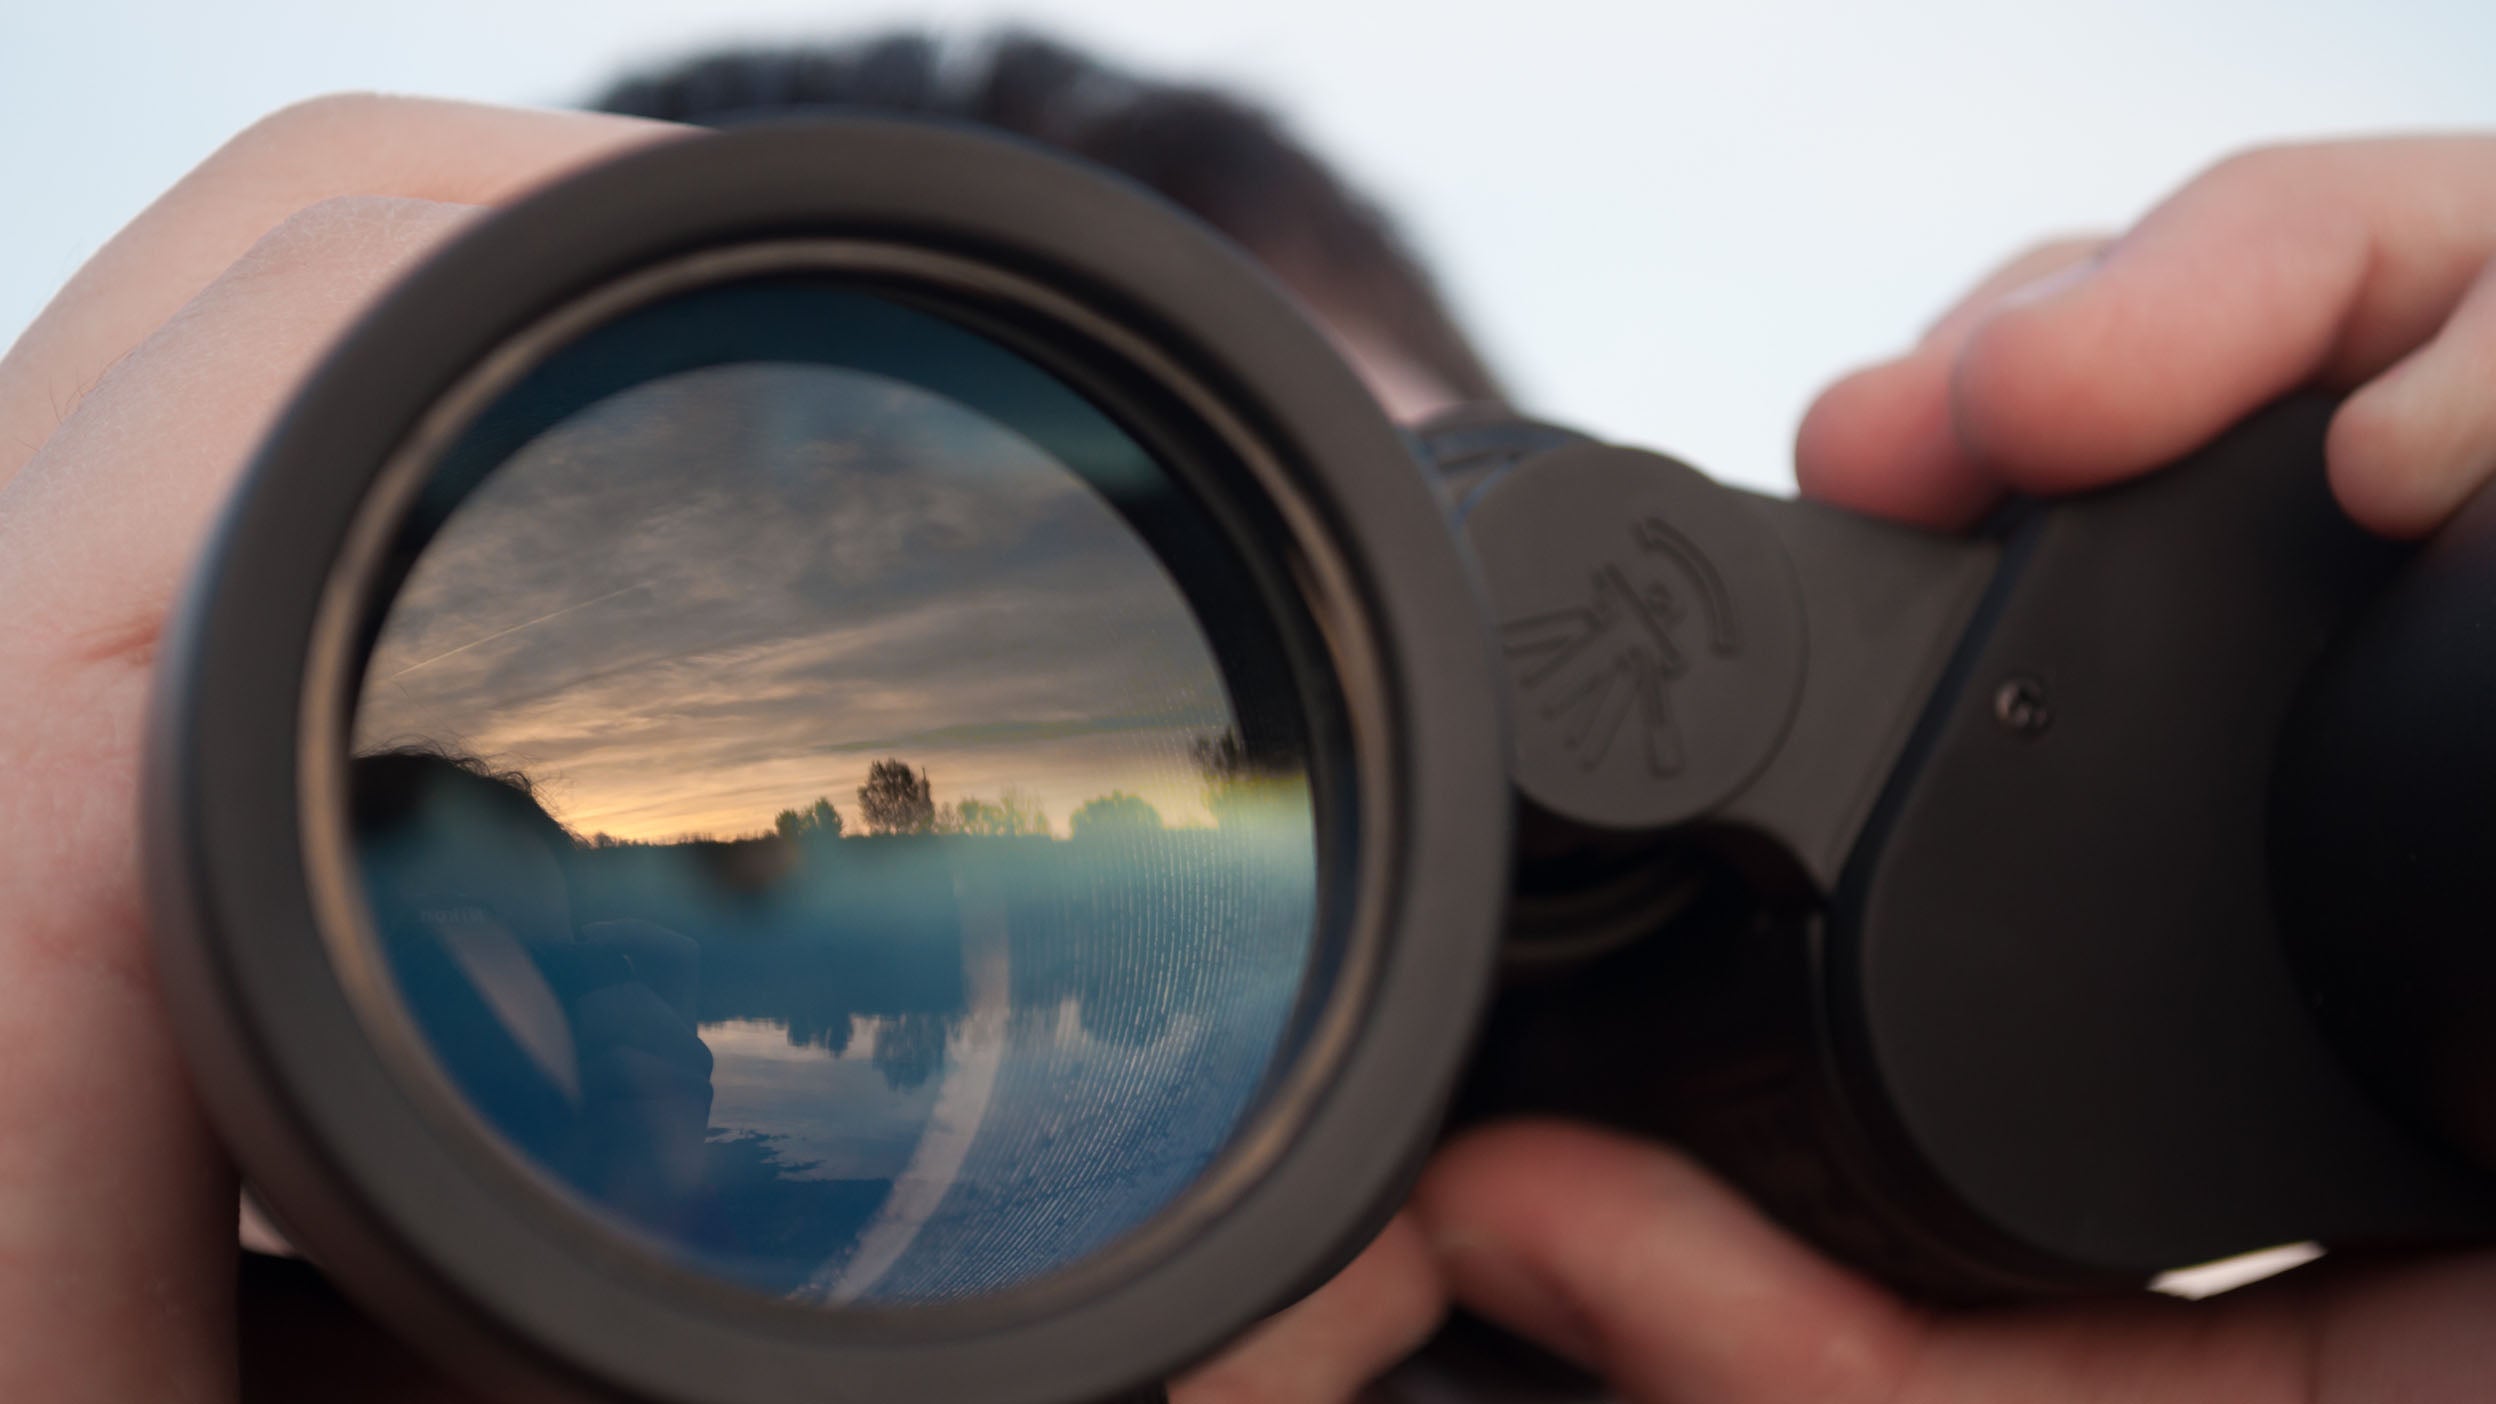 A person peering through binoculars represents an investor viewing the diversification within the companies that make up the Nasdaq-100 index.